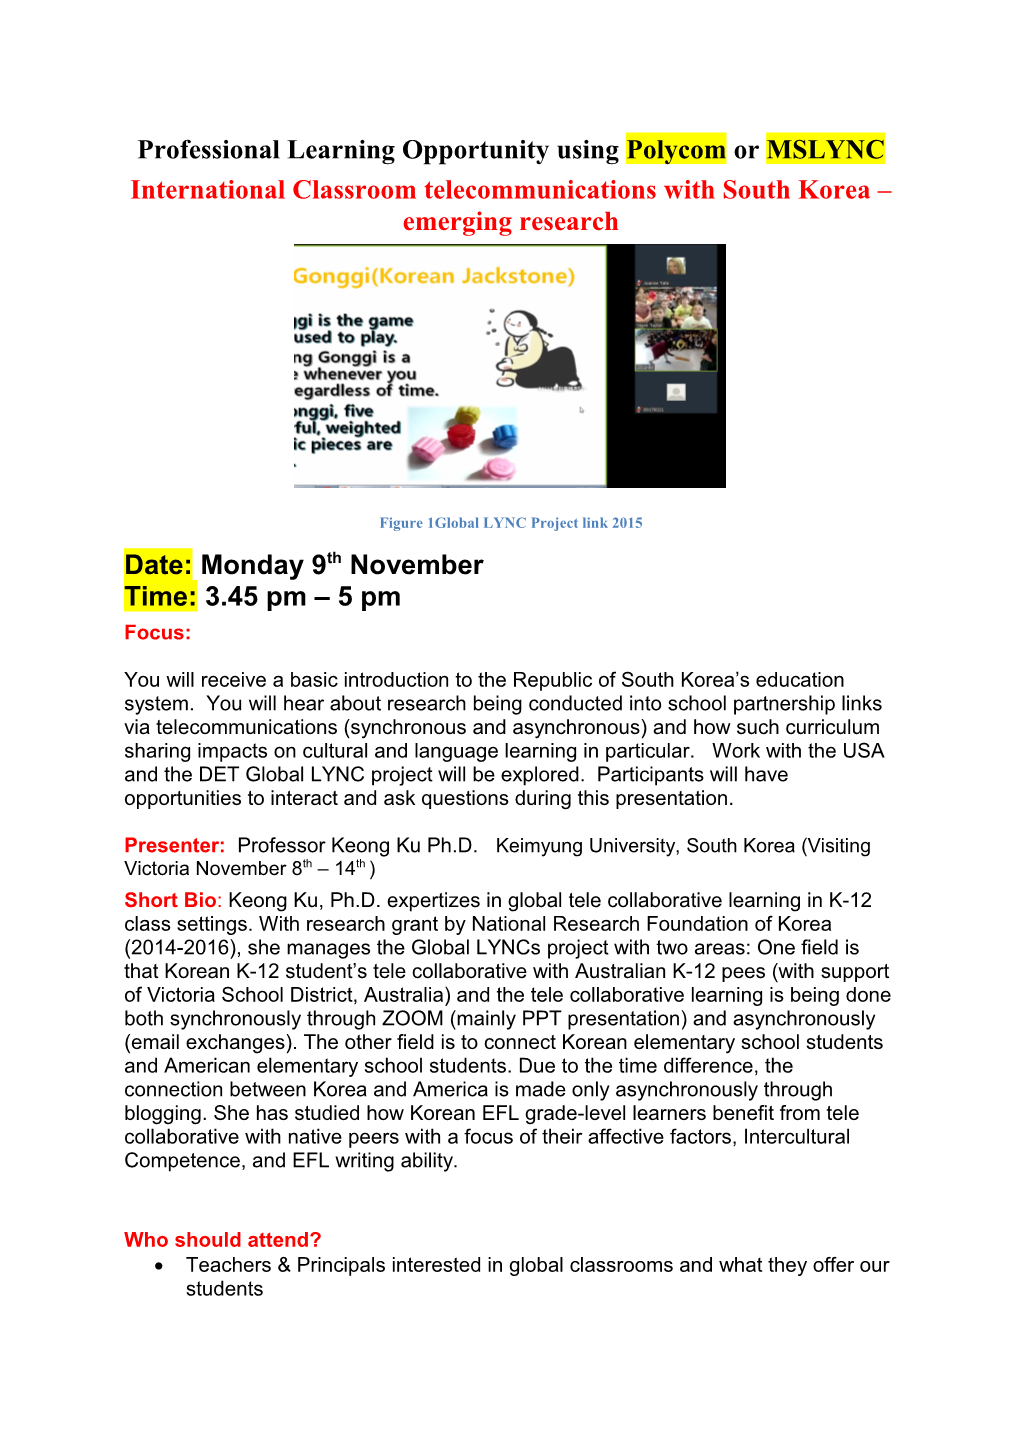 Professional Learning Opportunity Using Polycom Or MSLYNC